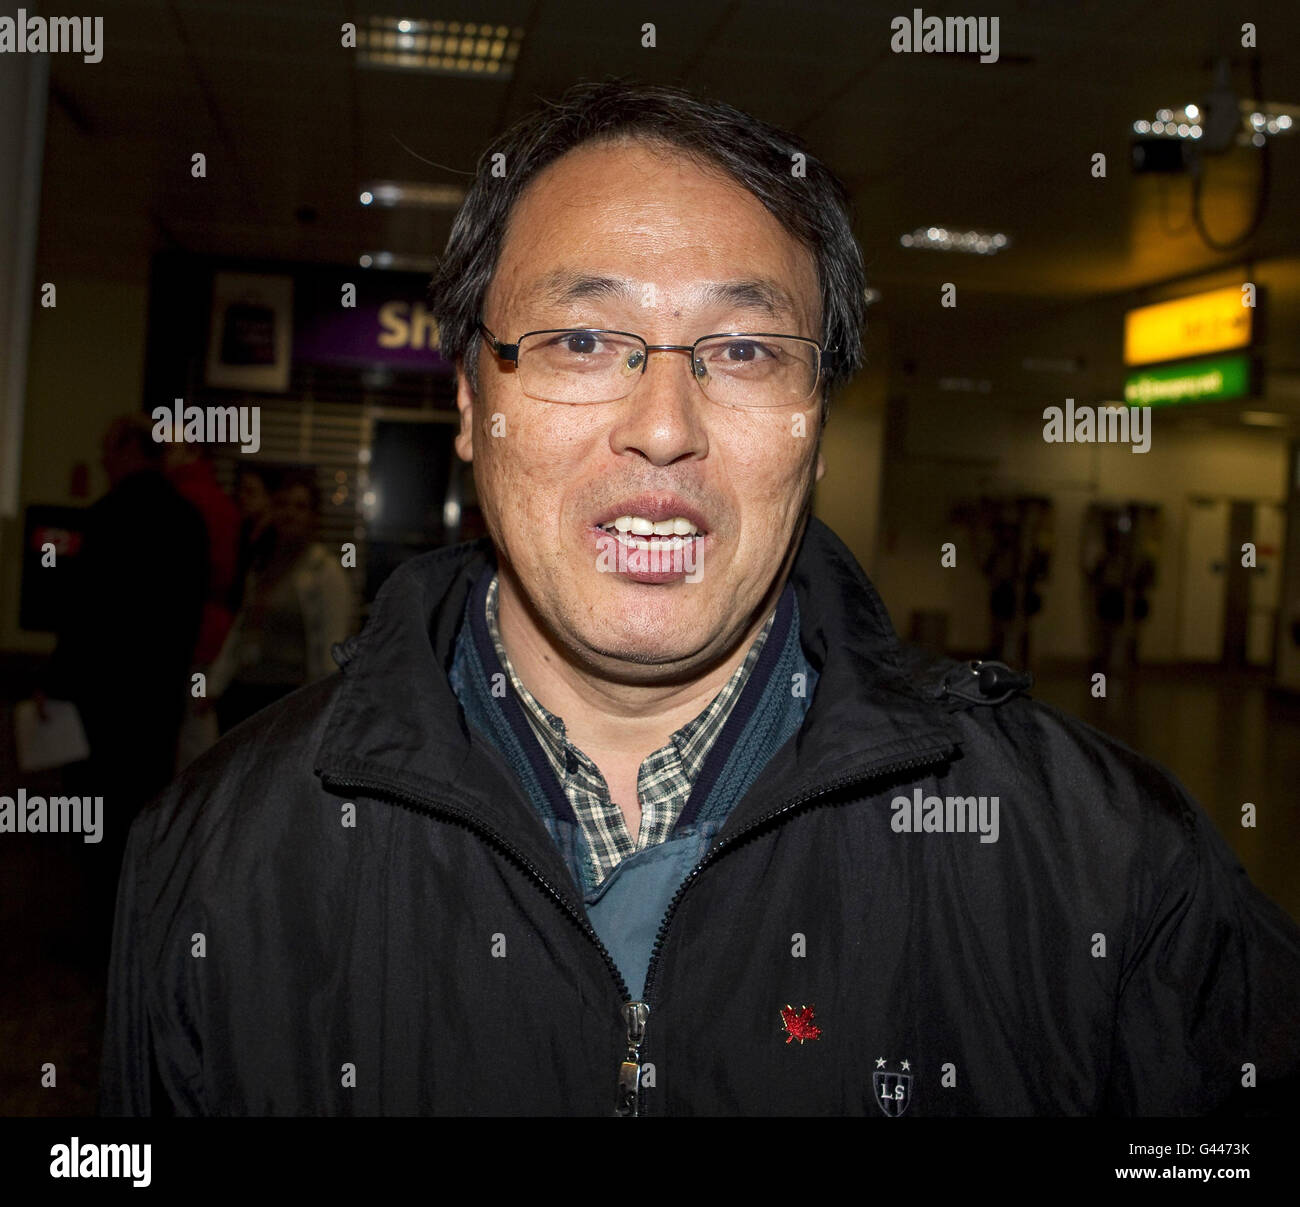 Oil worker James Kim, 55, arrives at Gatwick airport on a Government-chartered plane from Libya. Stock Photo